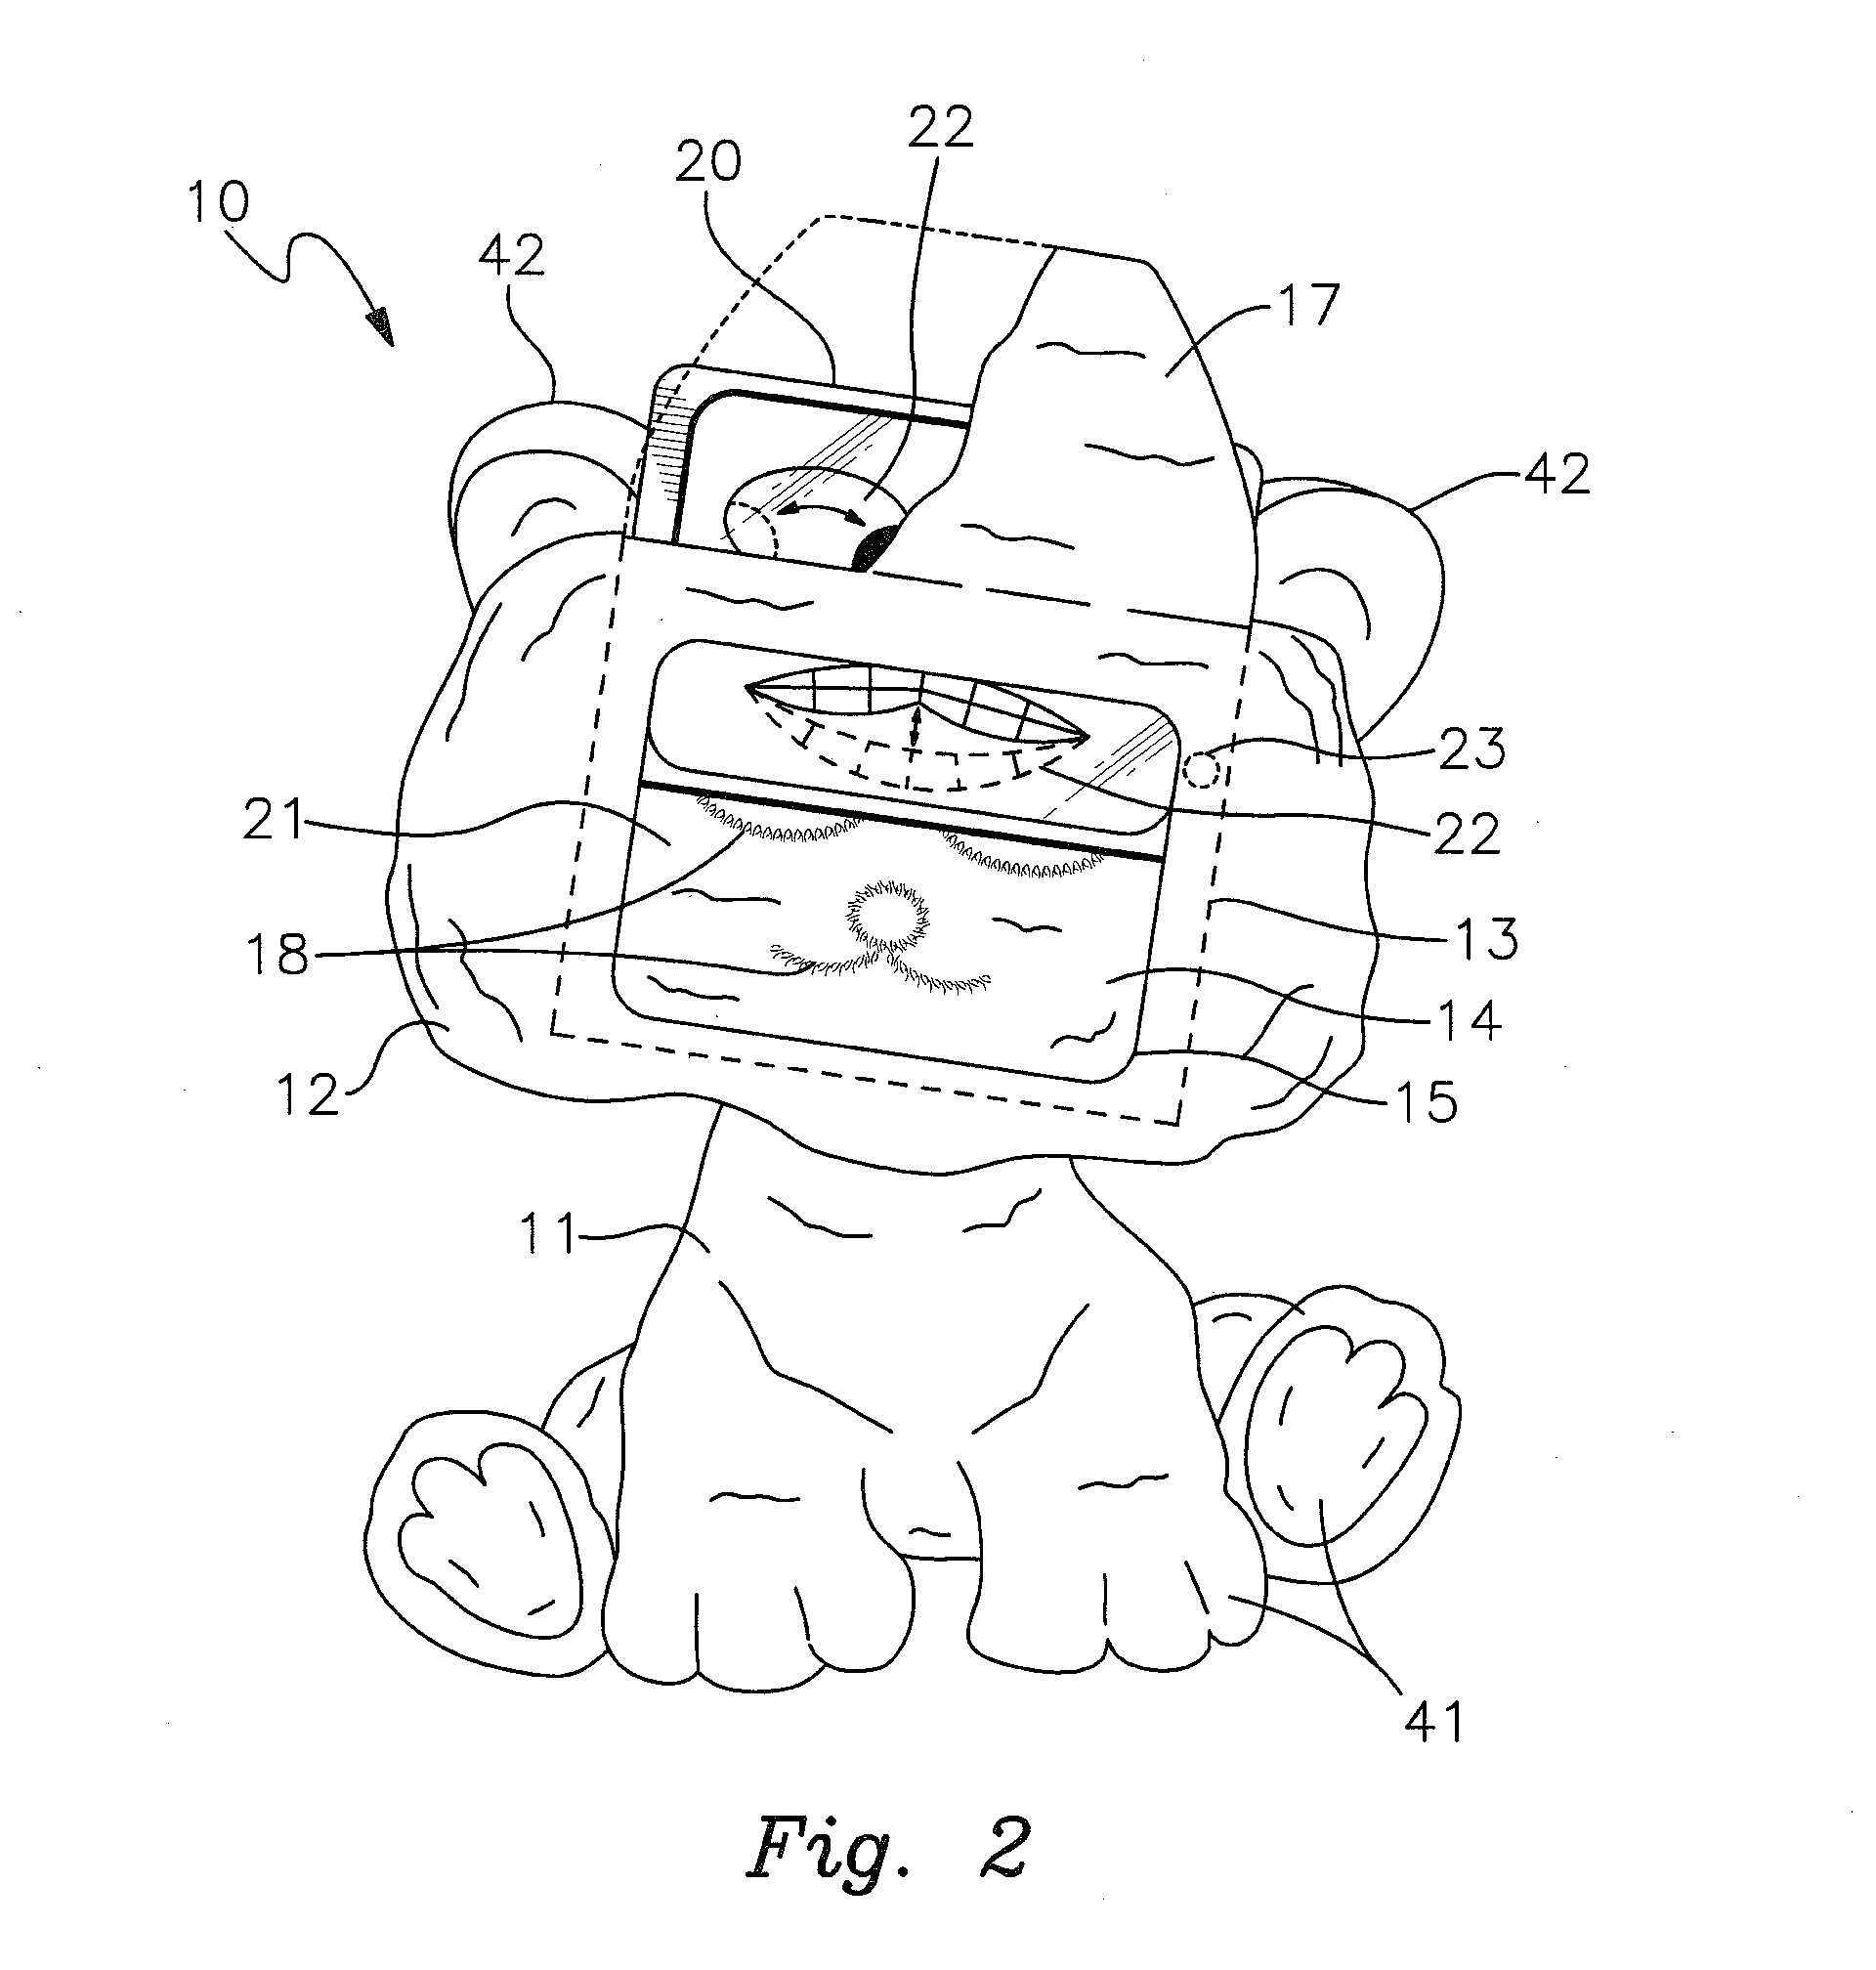 Figurine toy in combination with a portable, removable wireless computer device having a visual display screen